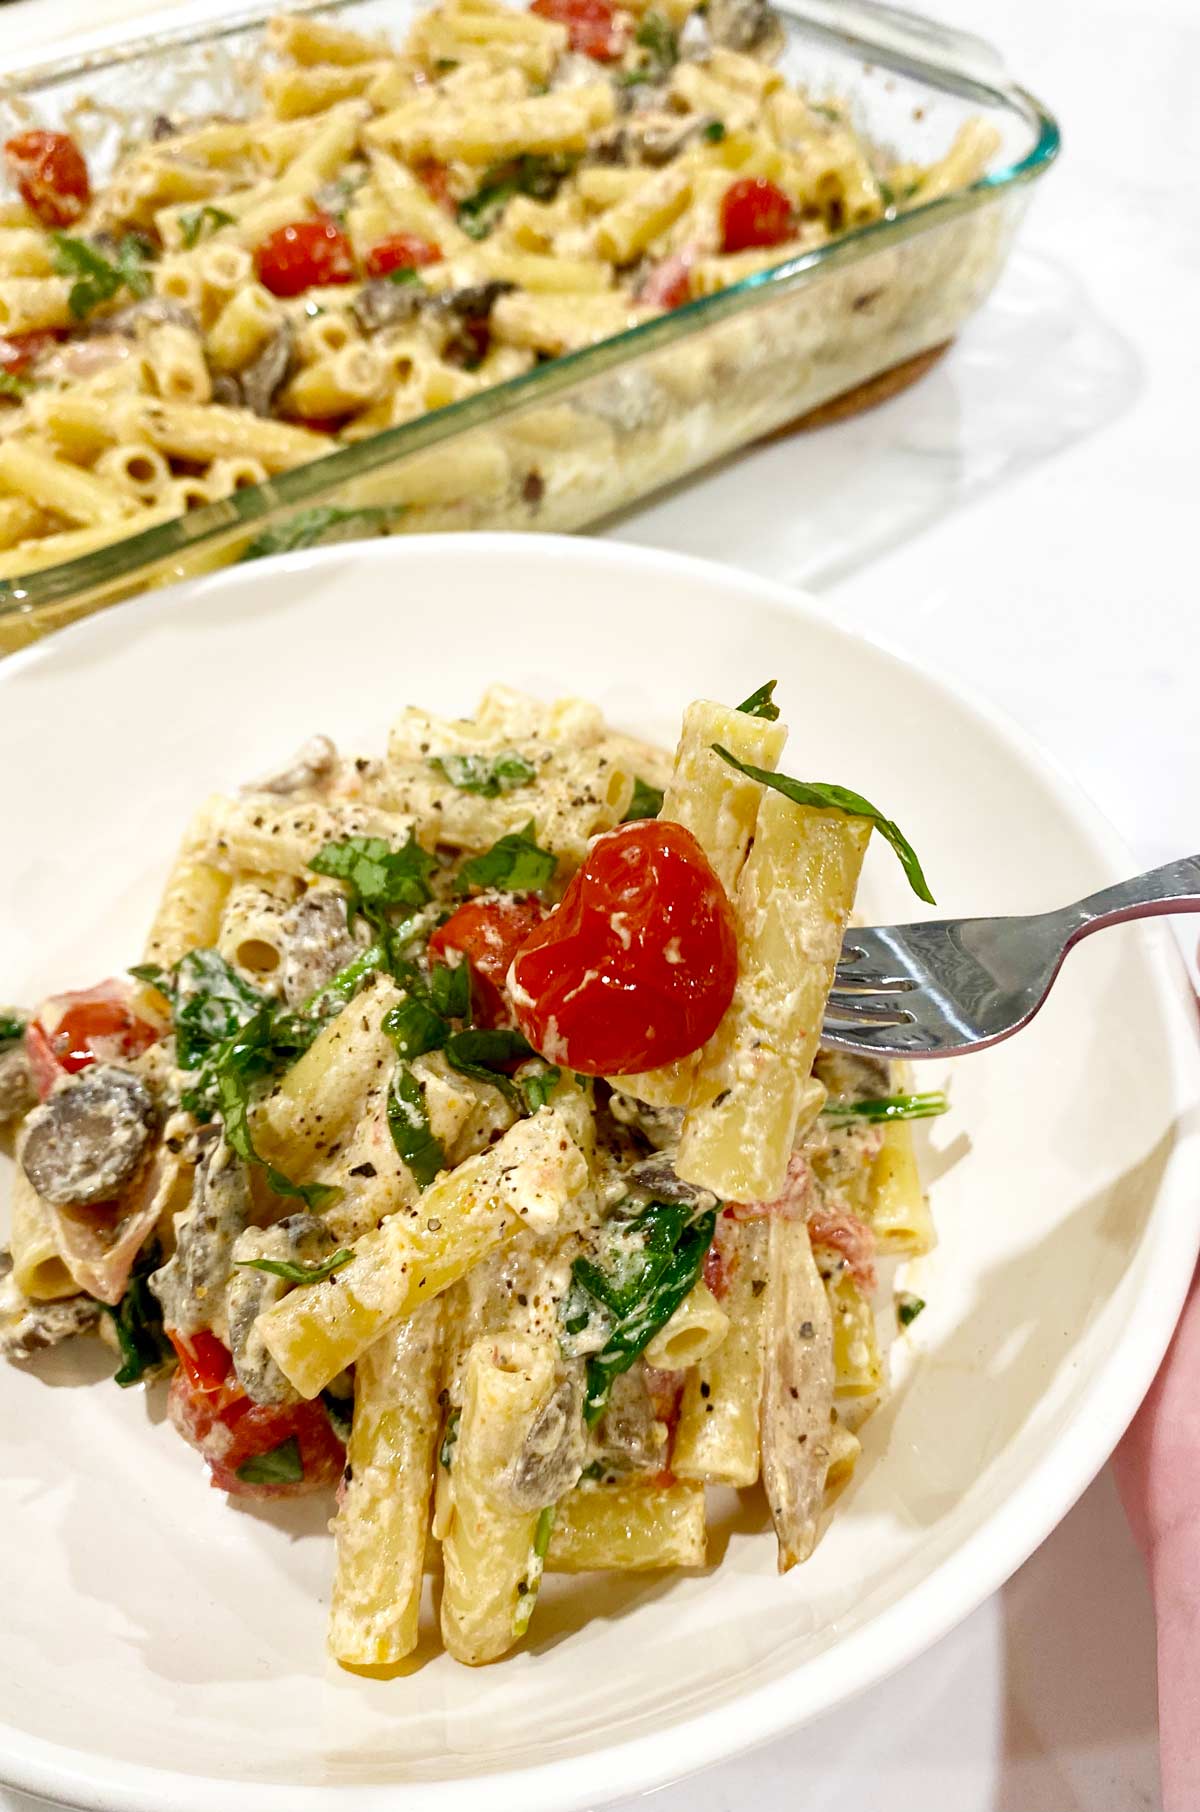 Baked Feta Pasta with Mushroom and Spinach